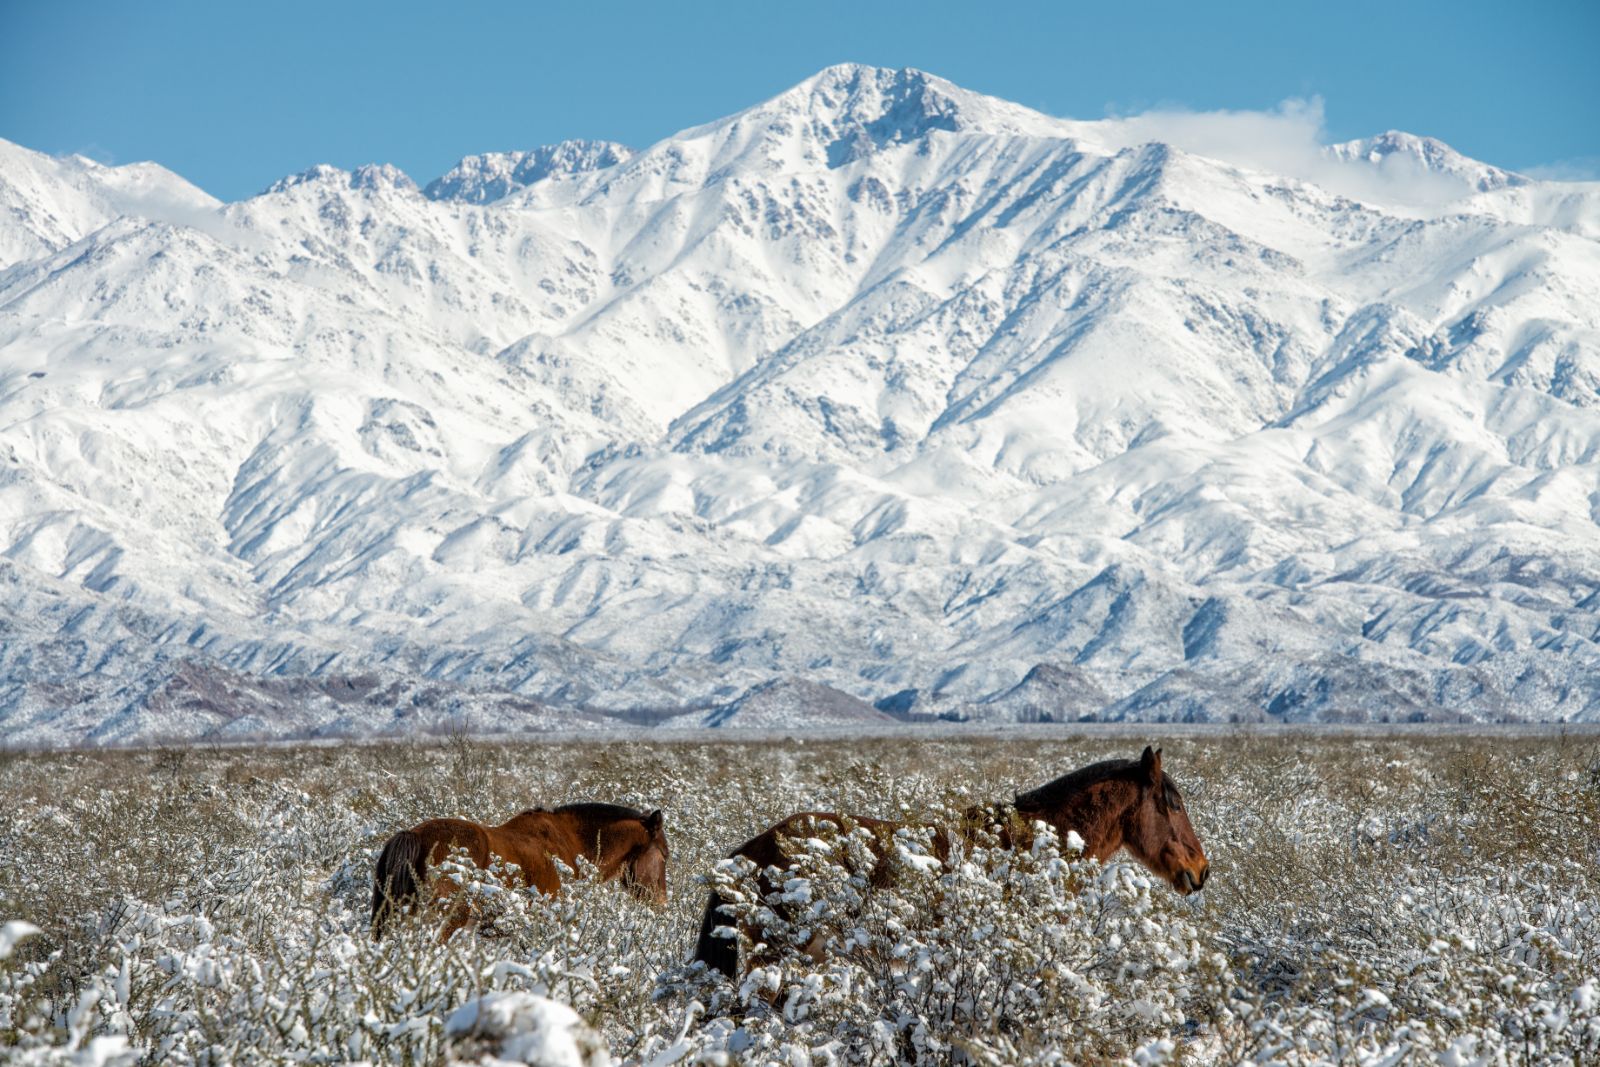 Horses in front of the Andes Mountains on the grounds of The Vines Resort & Spa in Argentina